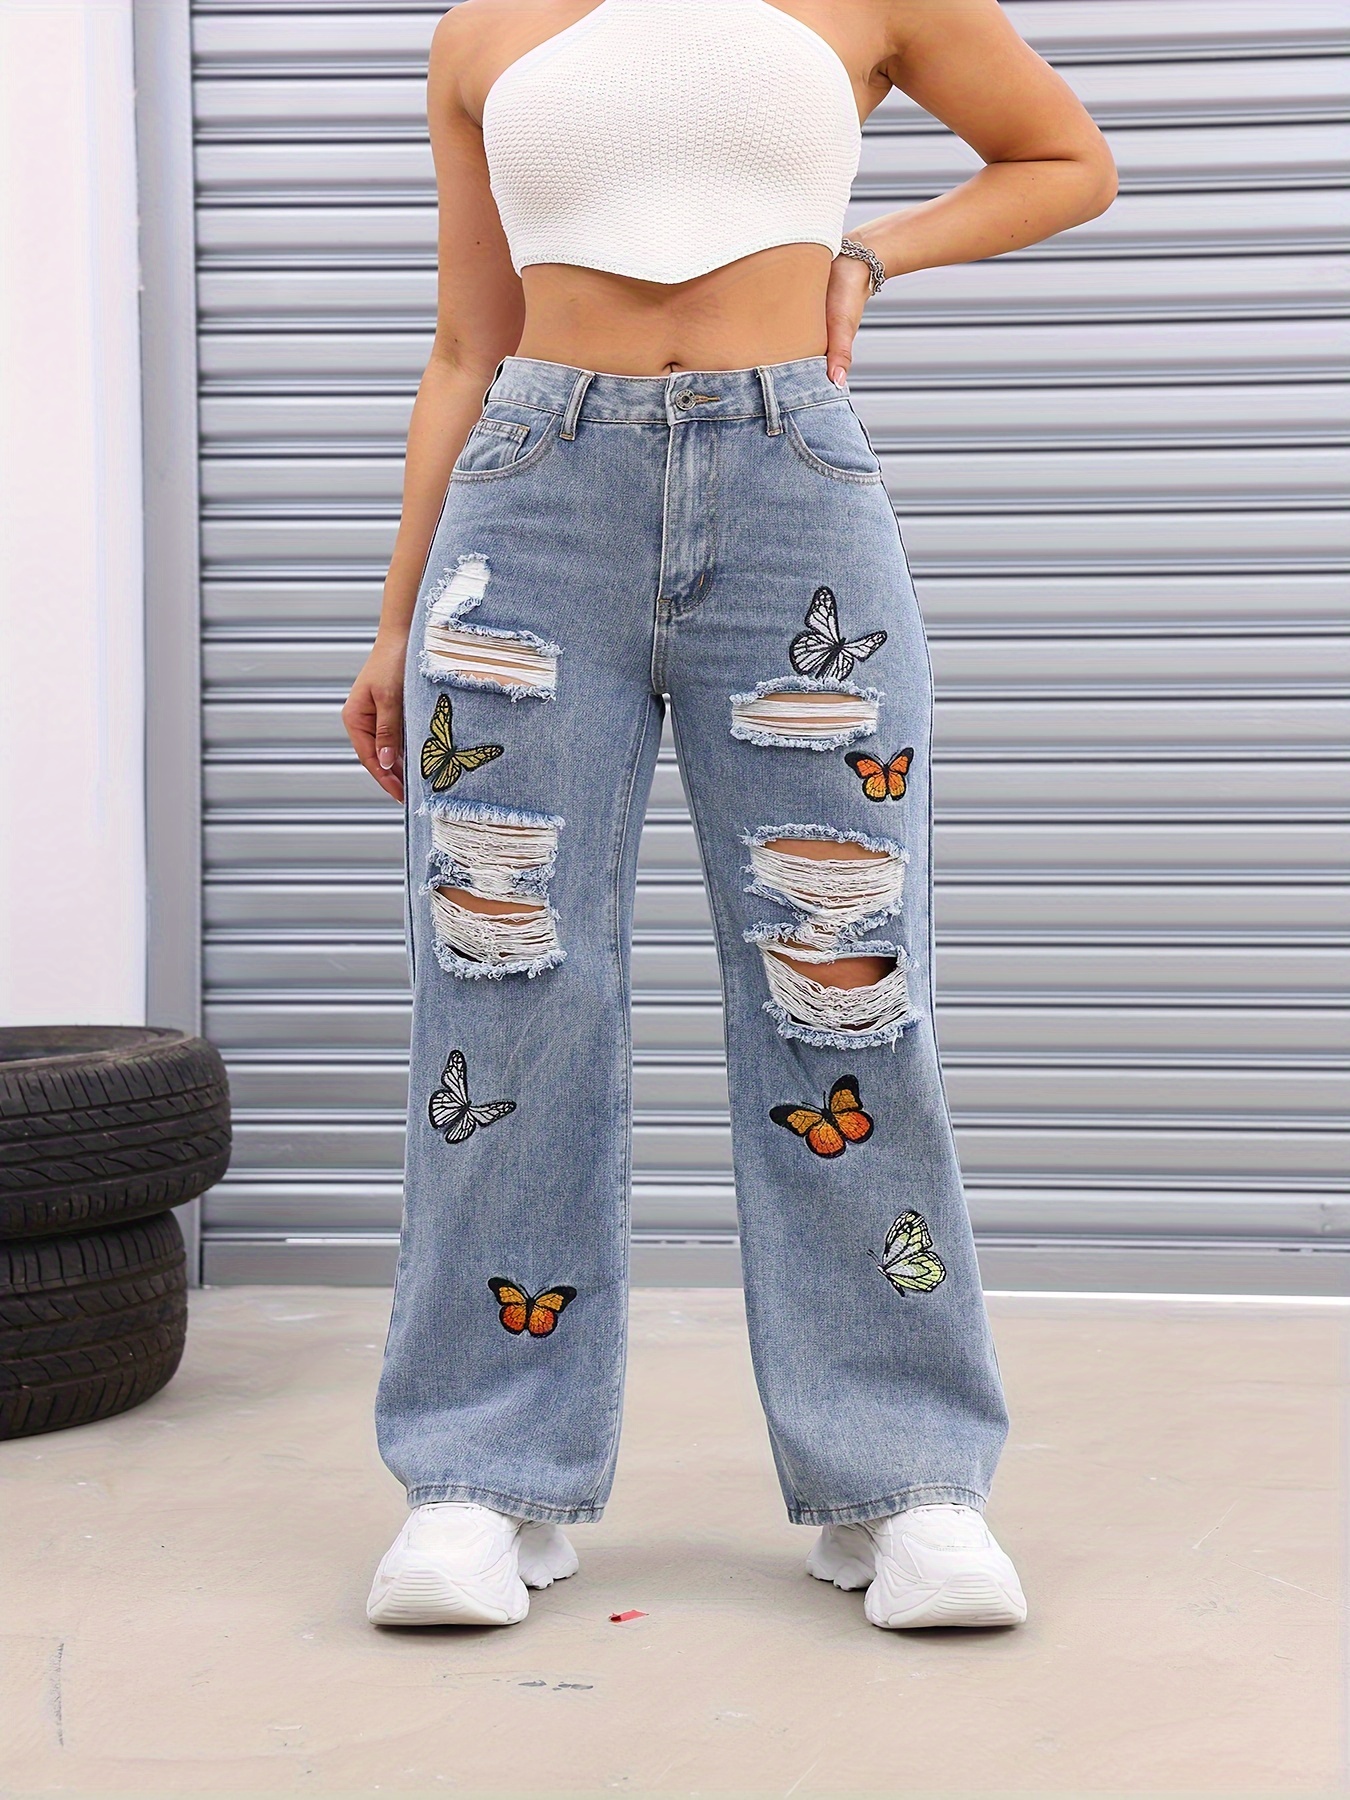 Wholesale Lady Embroidery Ripped Design Jeans Women Denim Pants